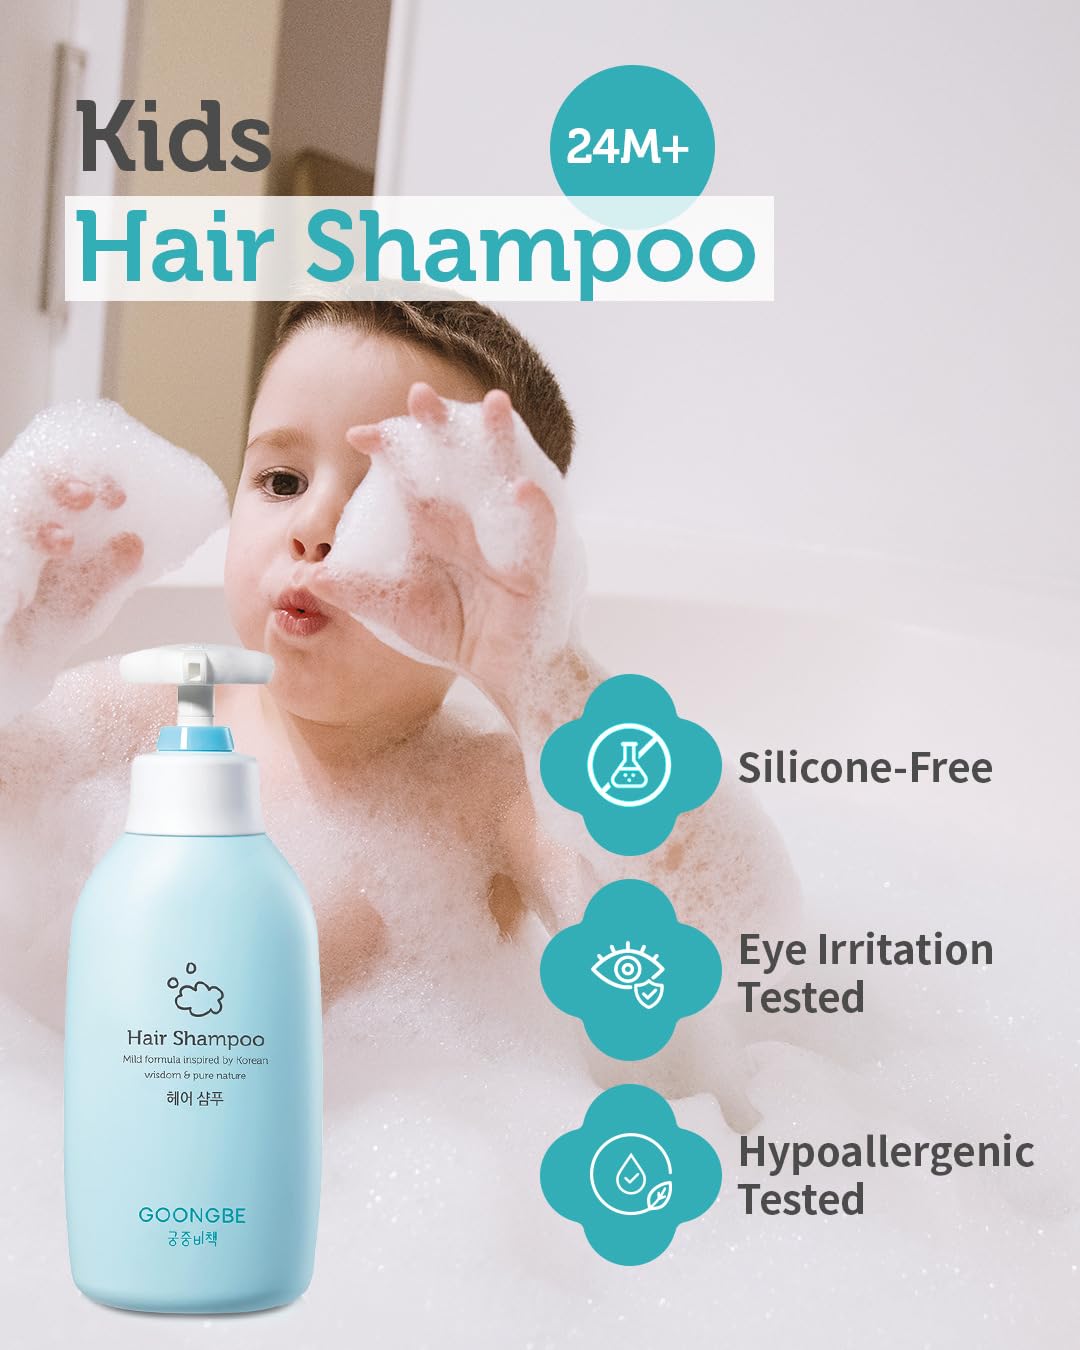 350ml GOONGBE Kids Hair Shampoo, designed for gentle and effective cleansing of children's hair.